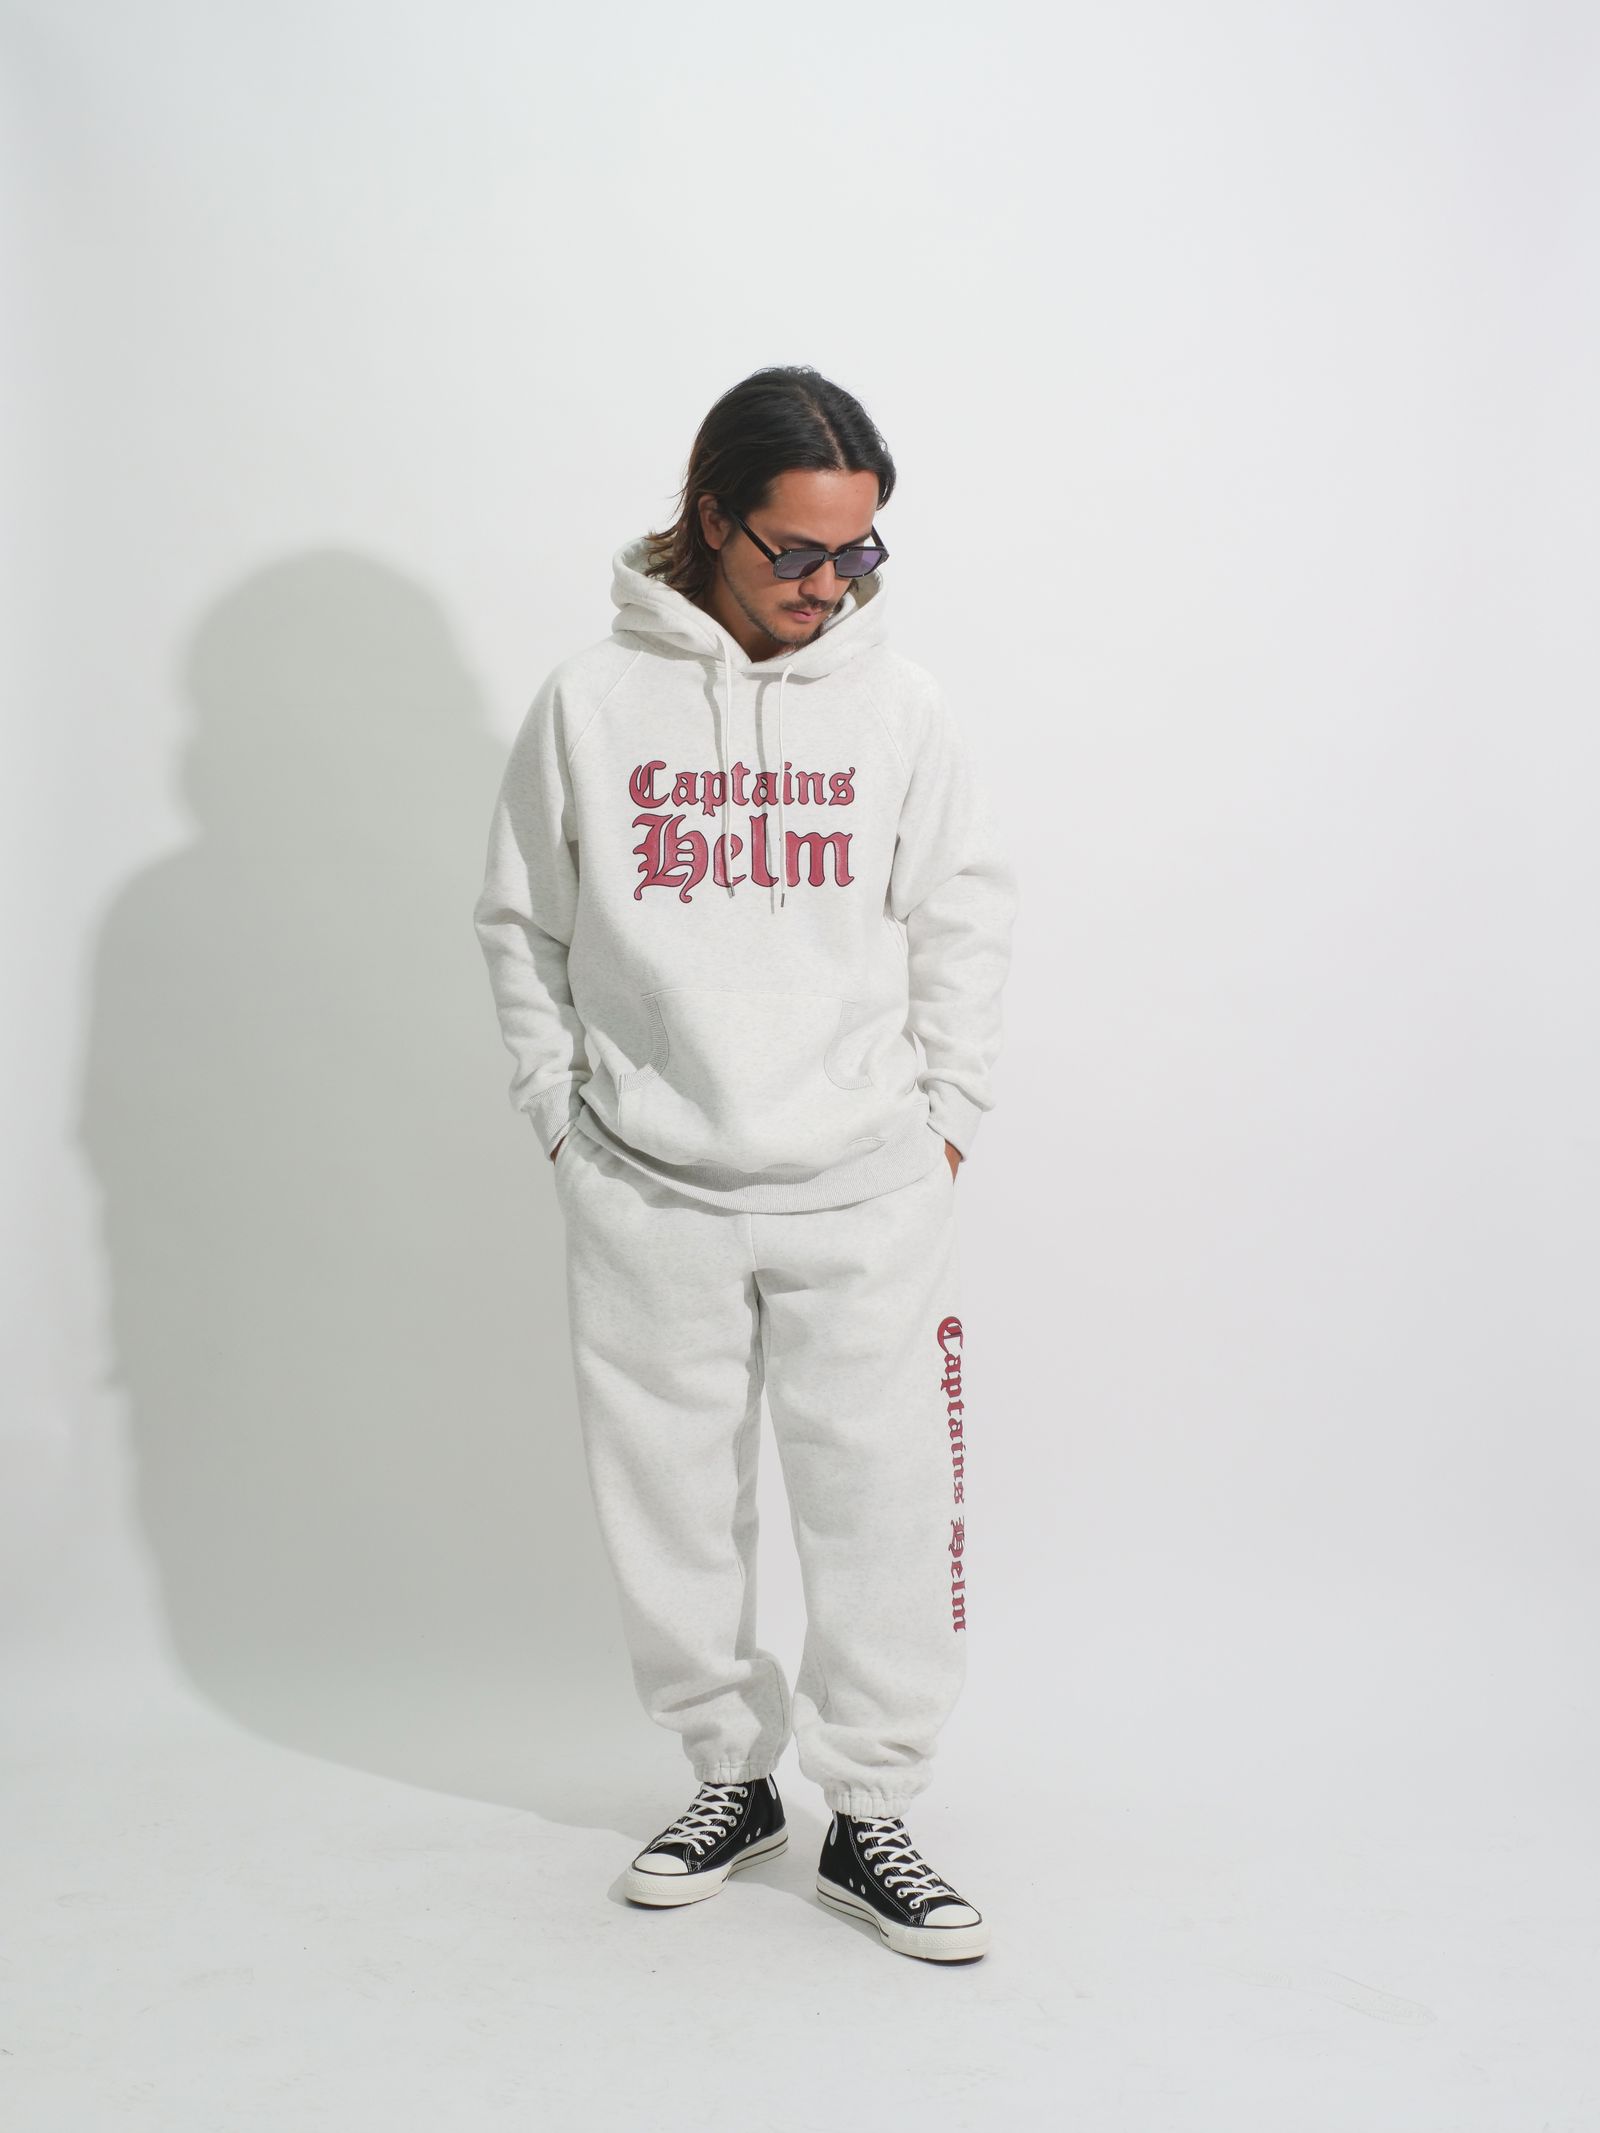 CAPTAINS HELM - HELM LOCAL HOODIE (OATMEAL) / オリジナル